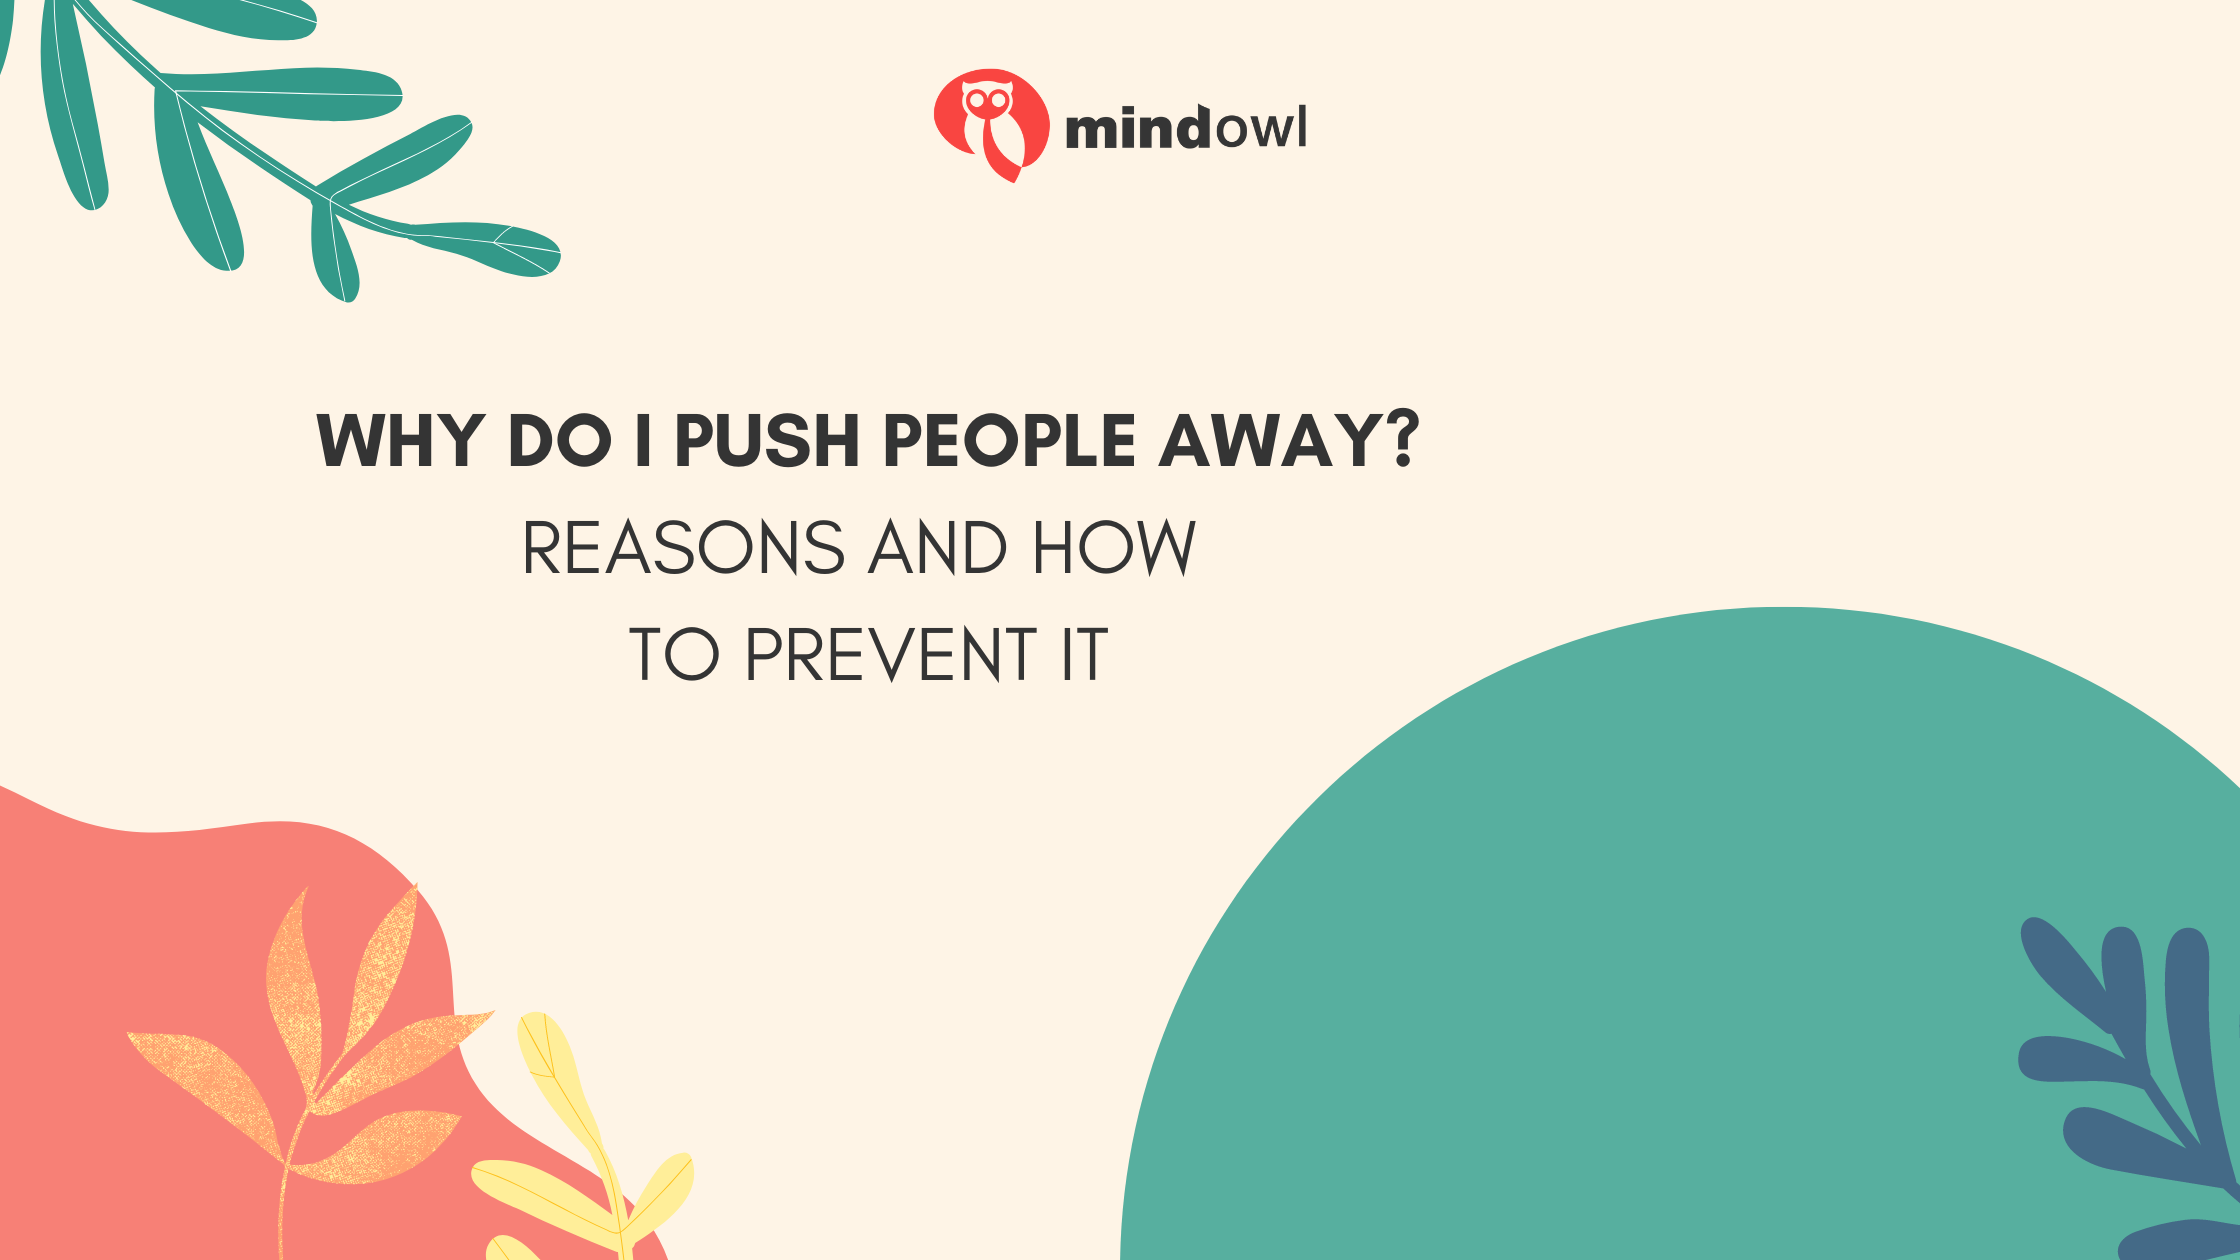 Why Do I Push People Away? Reasons and How to Prevent It